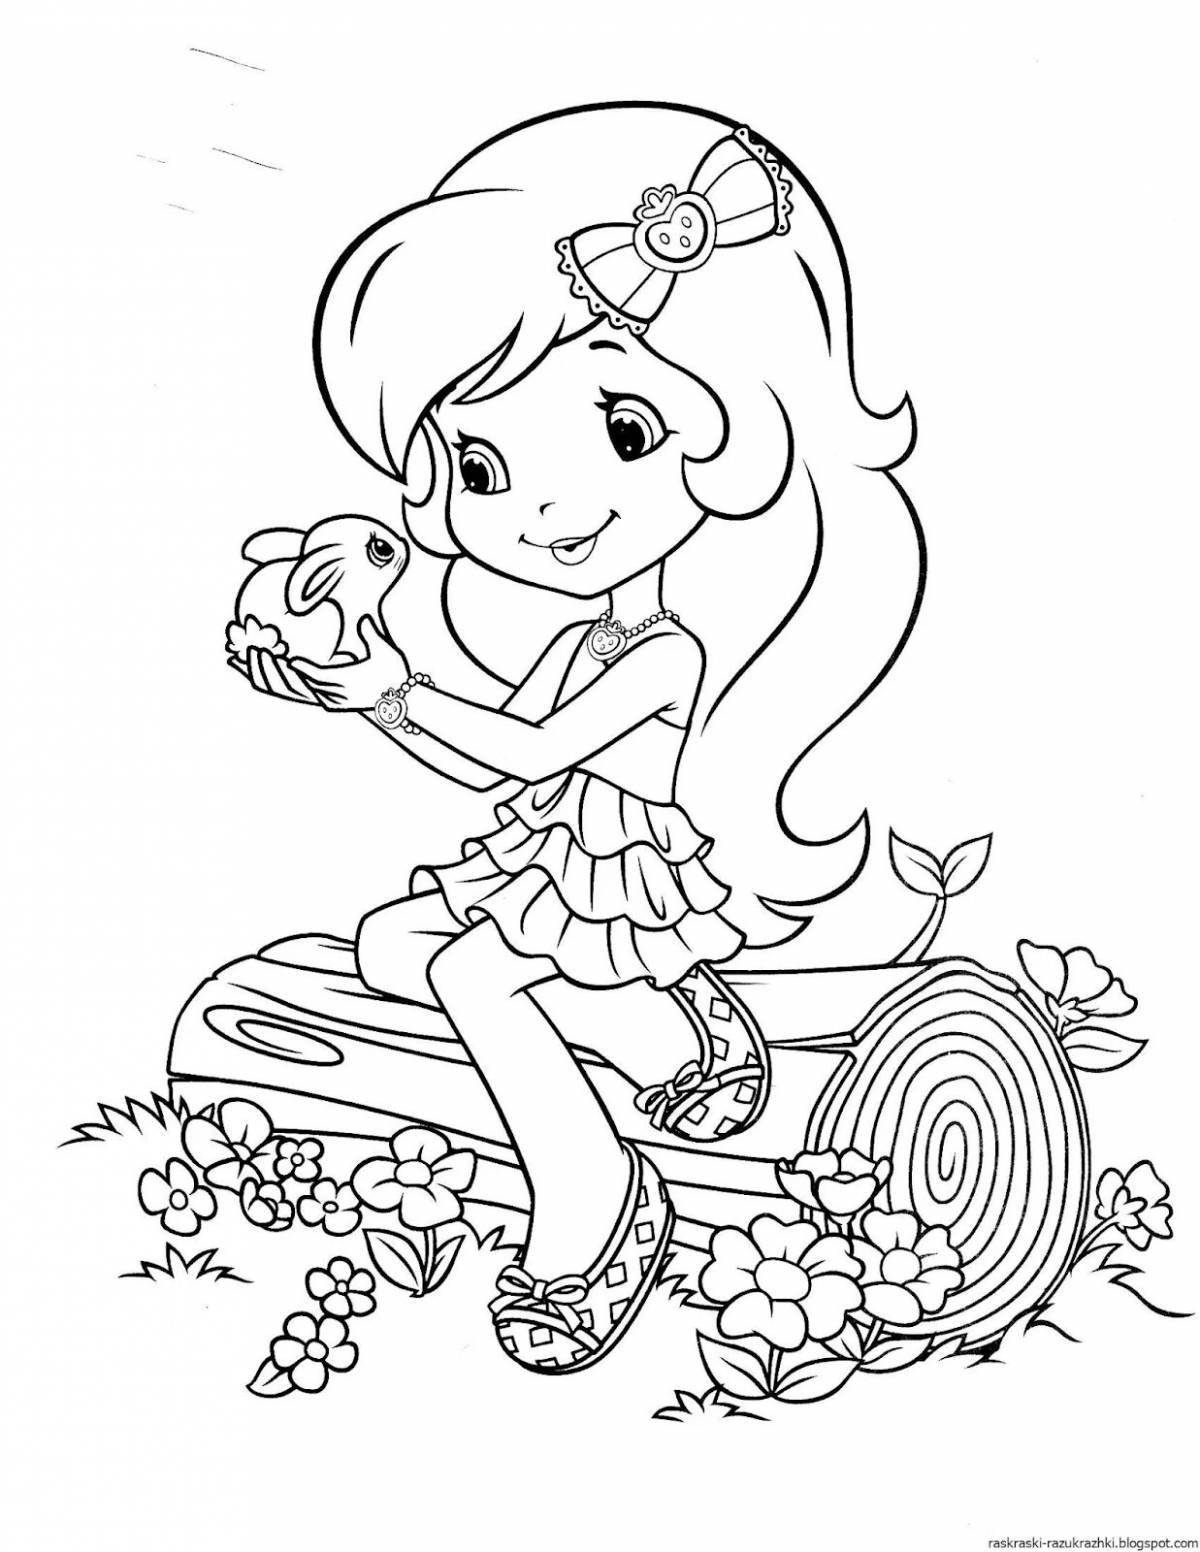 Charming coloring book for girls new